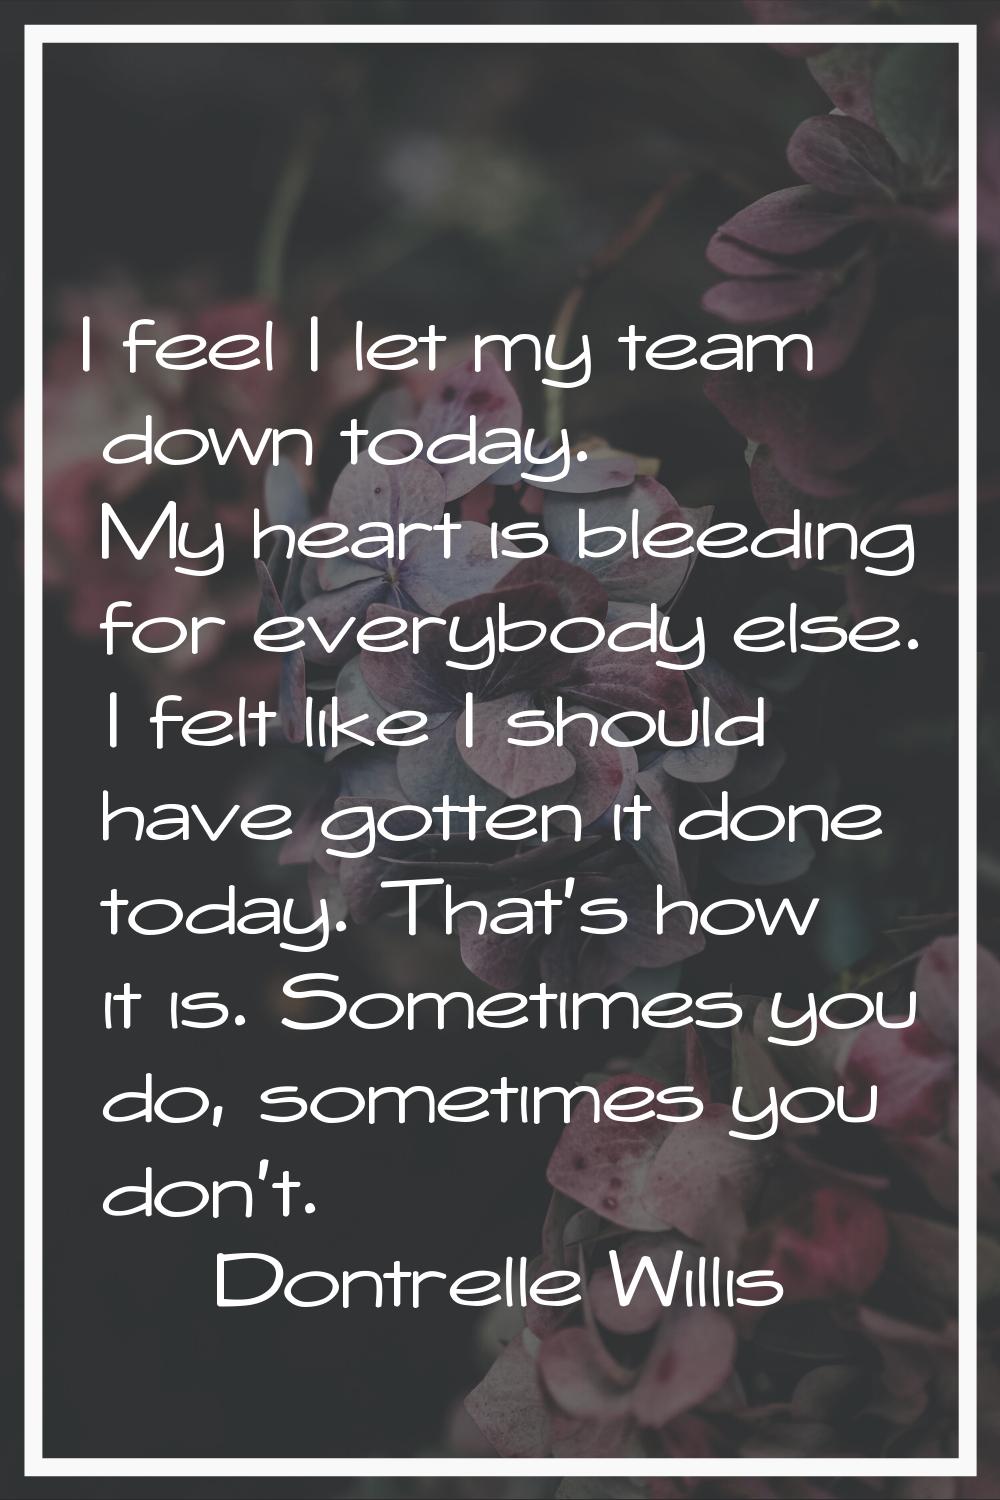 I feel I let my team down today. My heart is bleeding for everybody else. I felt like I should have